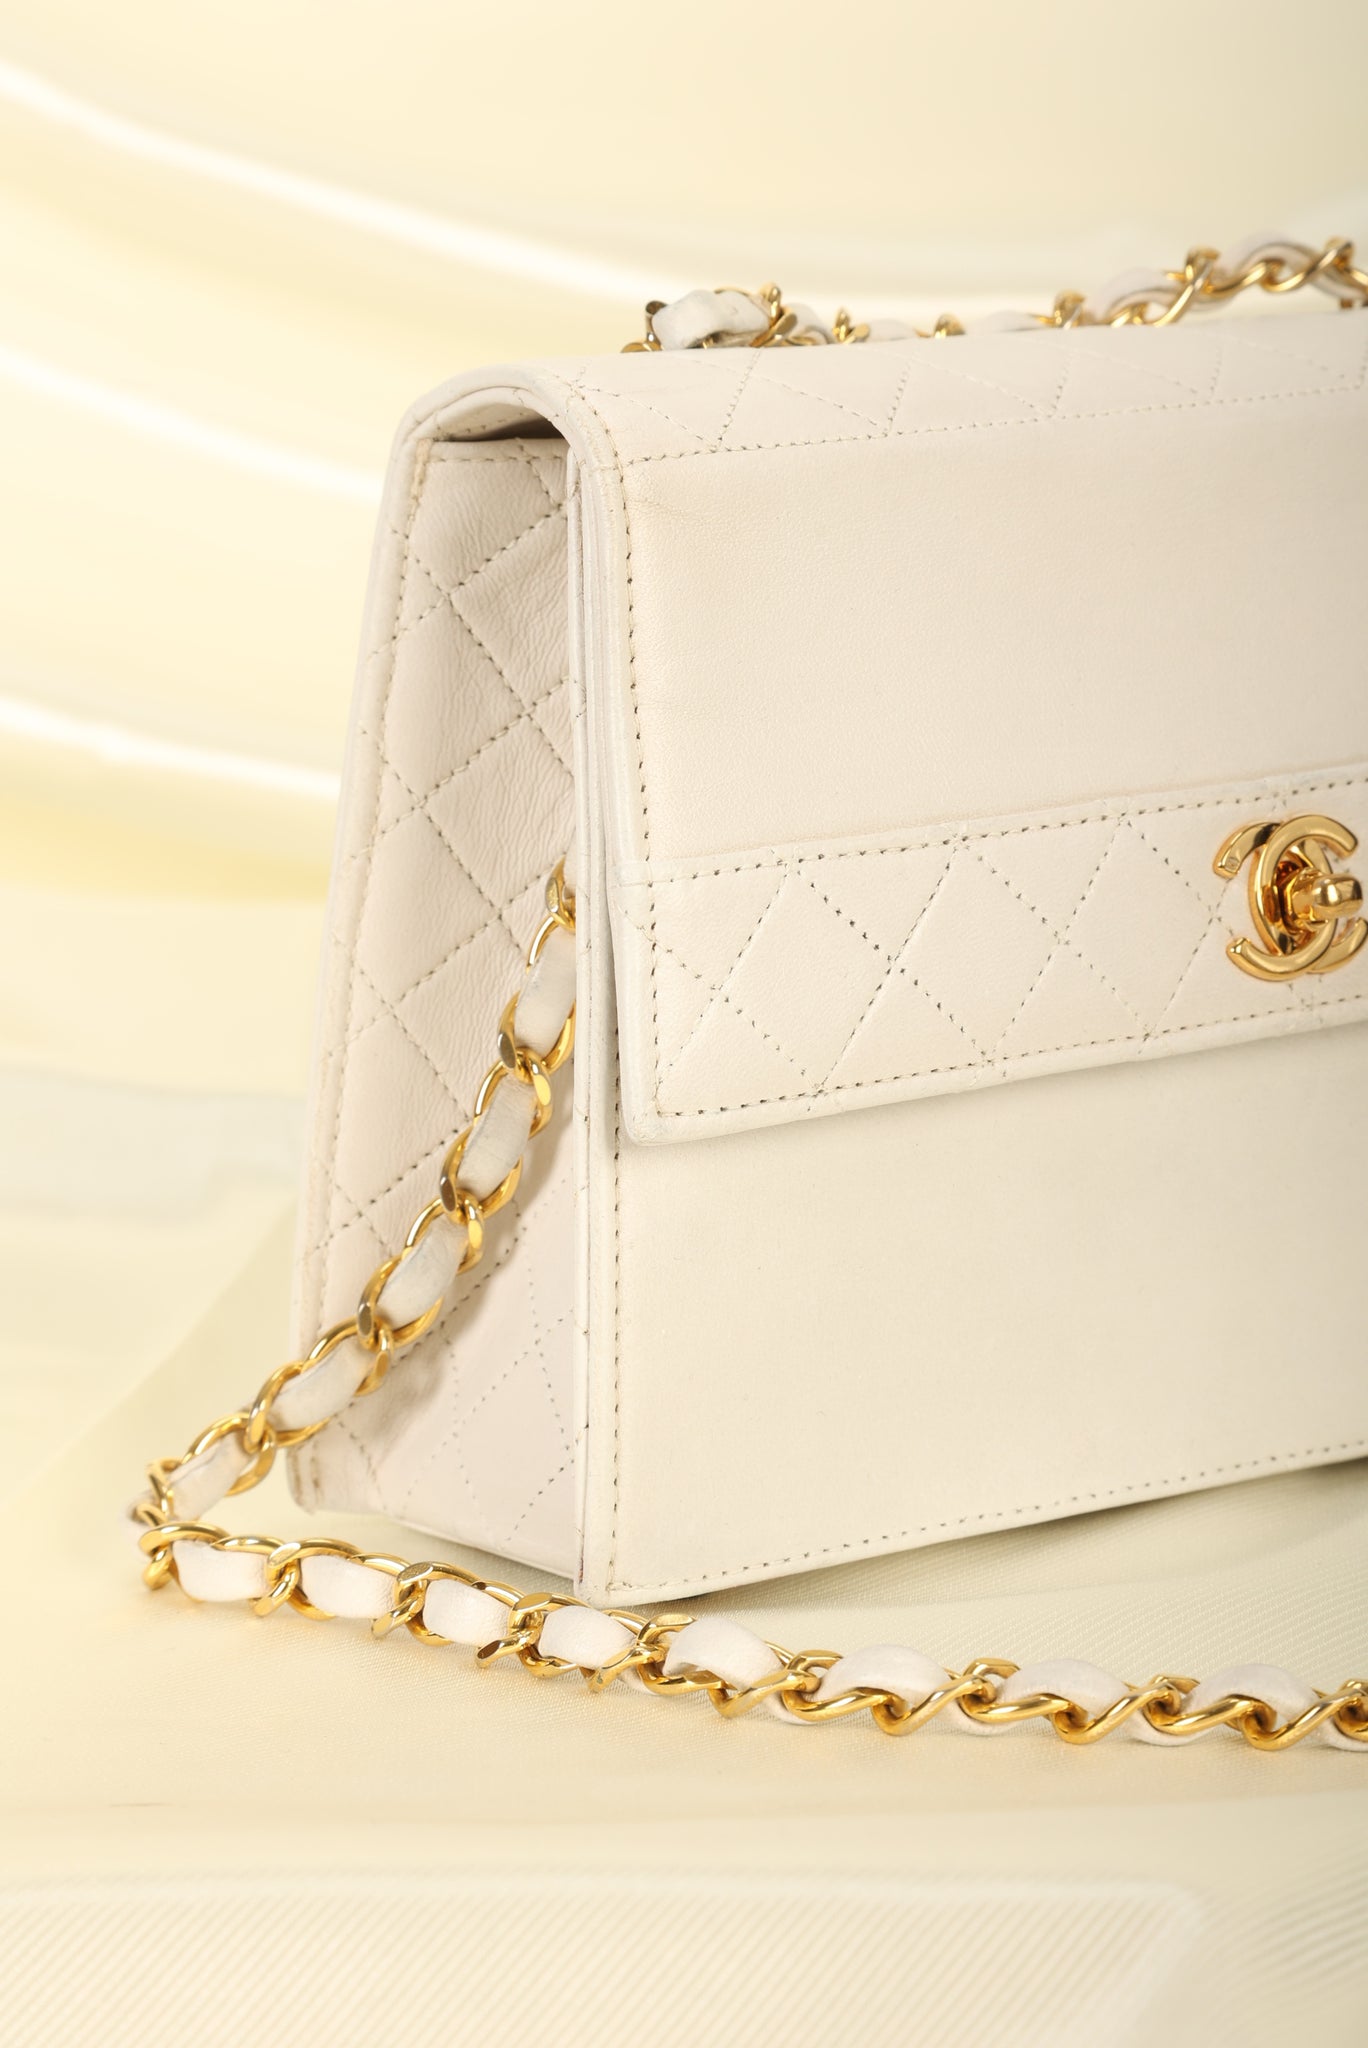 chanel coco luxe flap bag